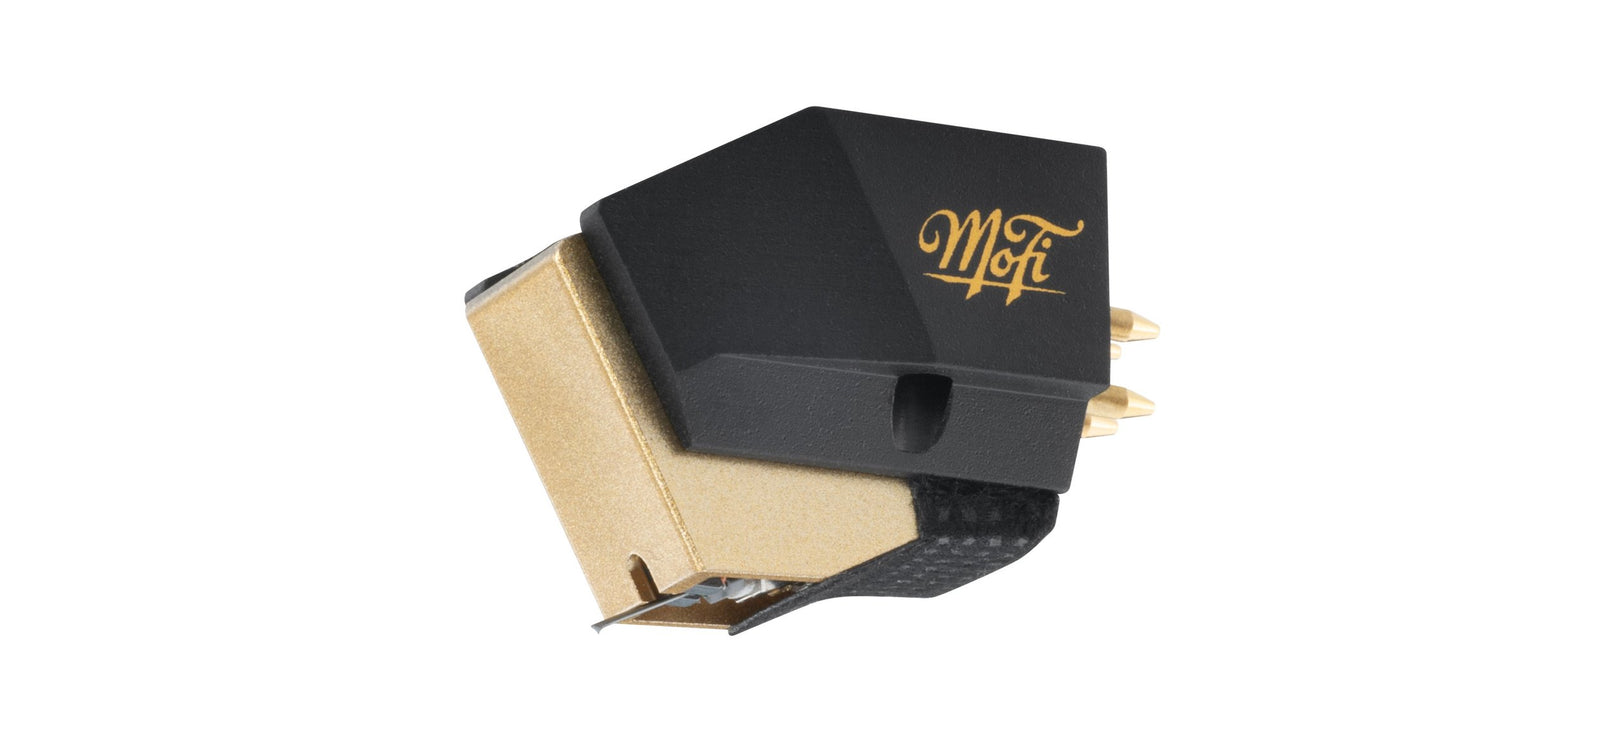 MOBILE FIDELITY ULTRAGOLD MC CARTRIDGE - Mobile Fidelity Produces Turntables, Phono Stages, Cartridges... Get the best deals at vinylsound.ca for Mobile Fidelity StudioDeck Foundation Turntable - Ultradeck - Fender PrecisionDeck - Mobile Fidelity UltraPhono Phono Stage - Mastertracker - MasterTracker Cartridge - UltraGold MC - StudioTracker Cartridge...